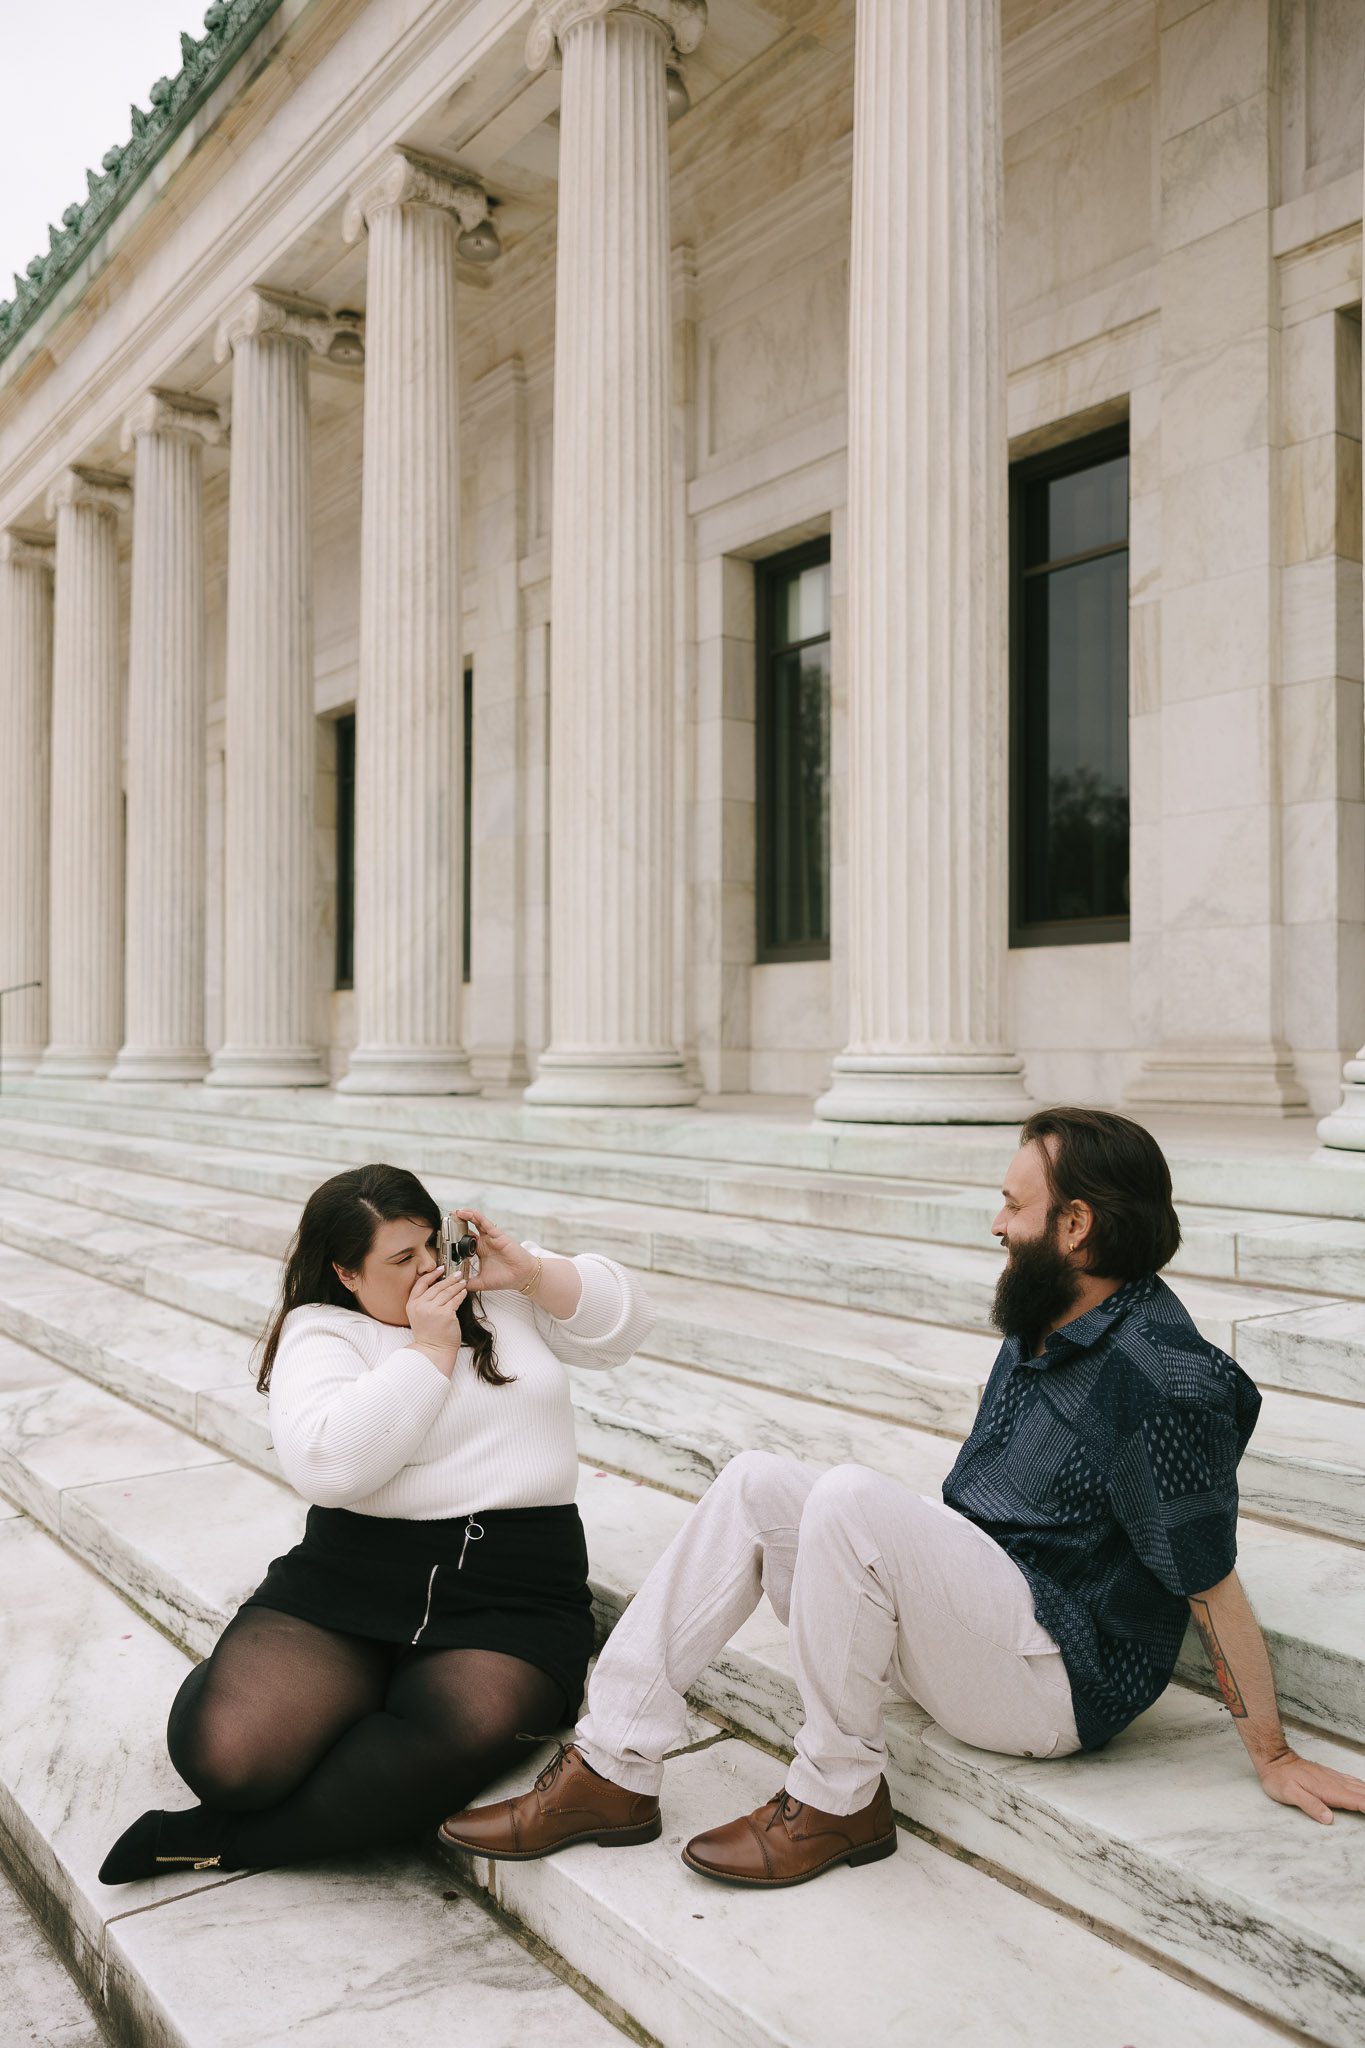 Bethany and Adam sit in front of the museum, taking a picture on a film camera